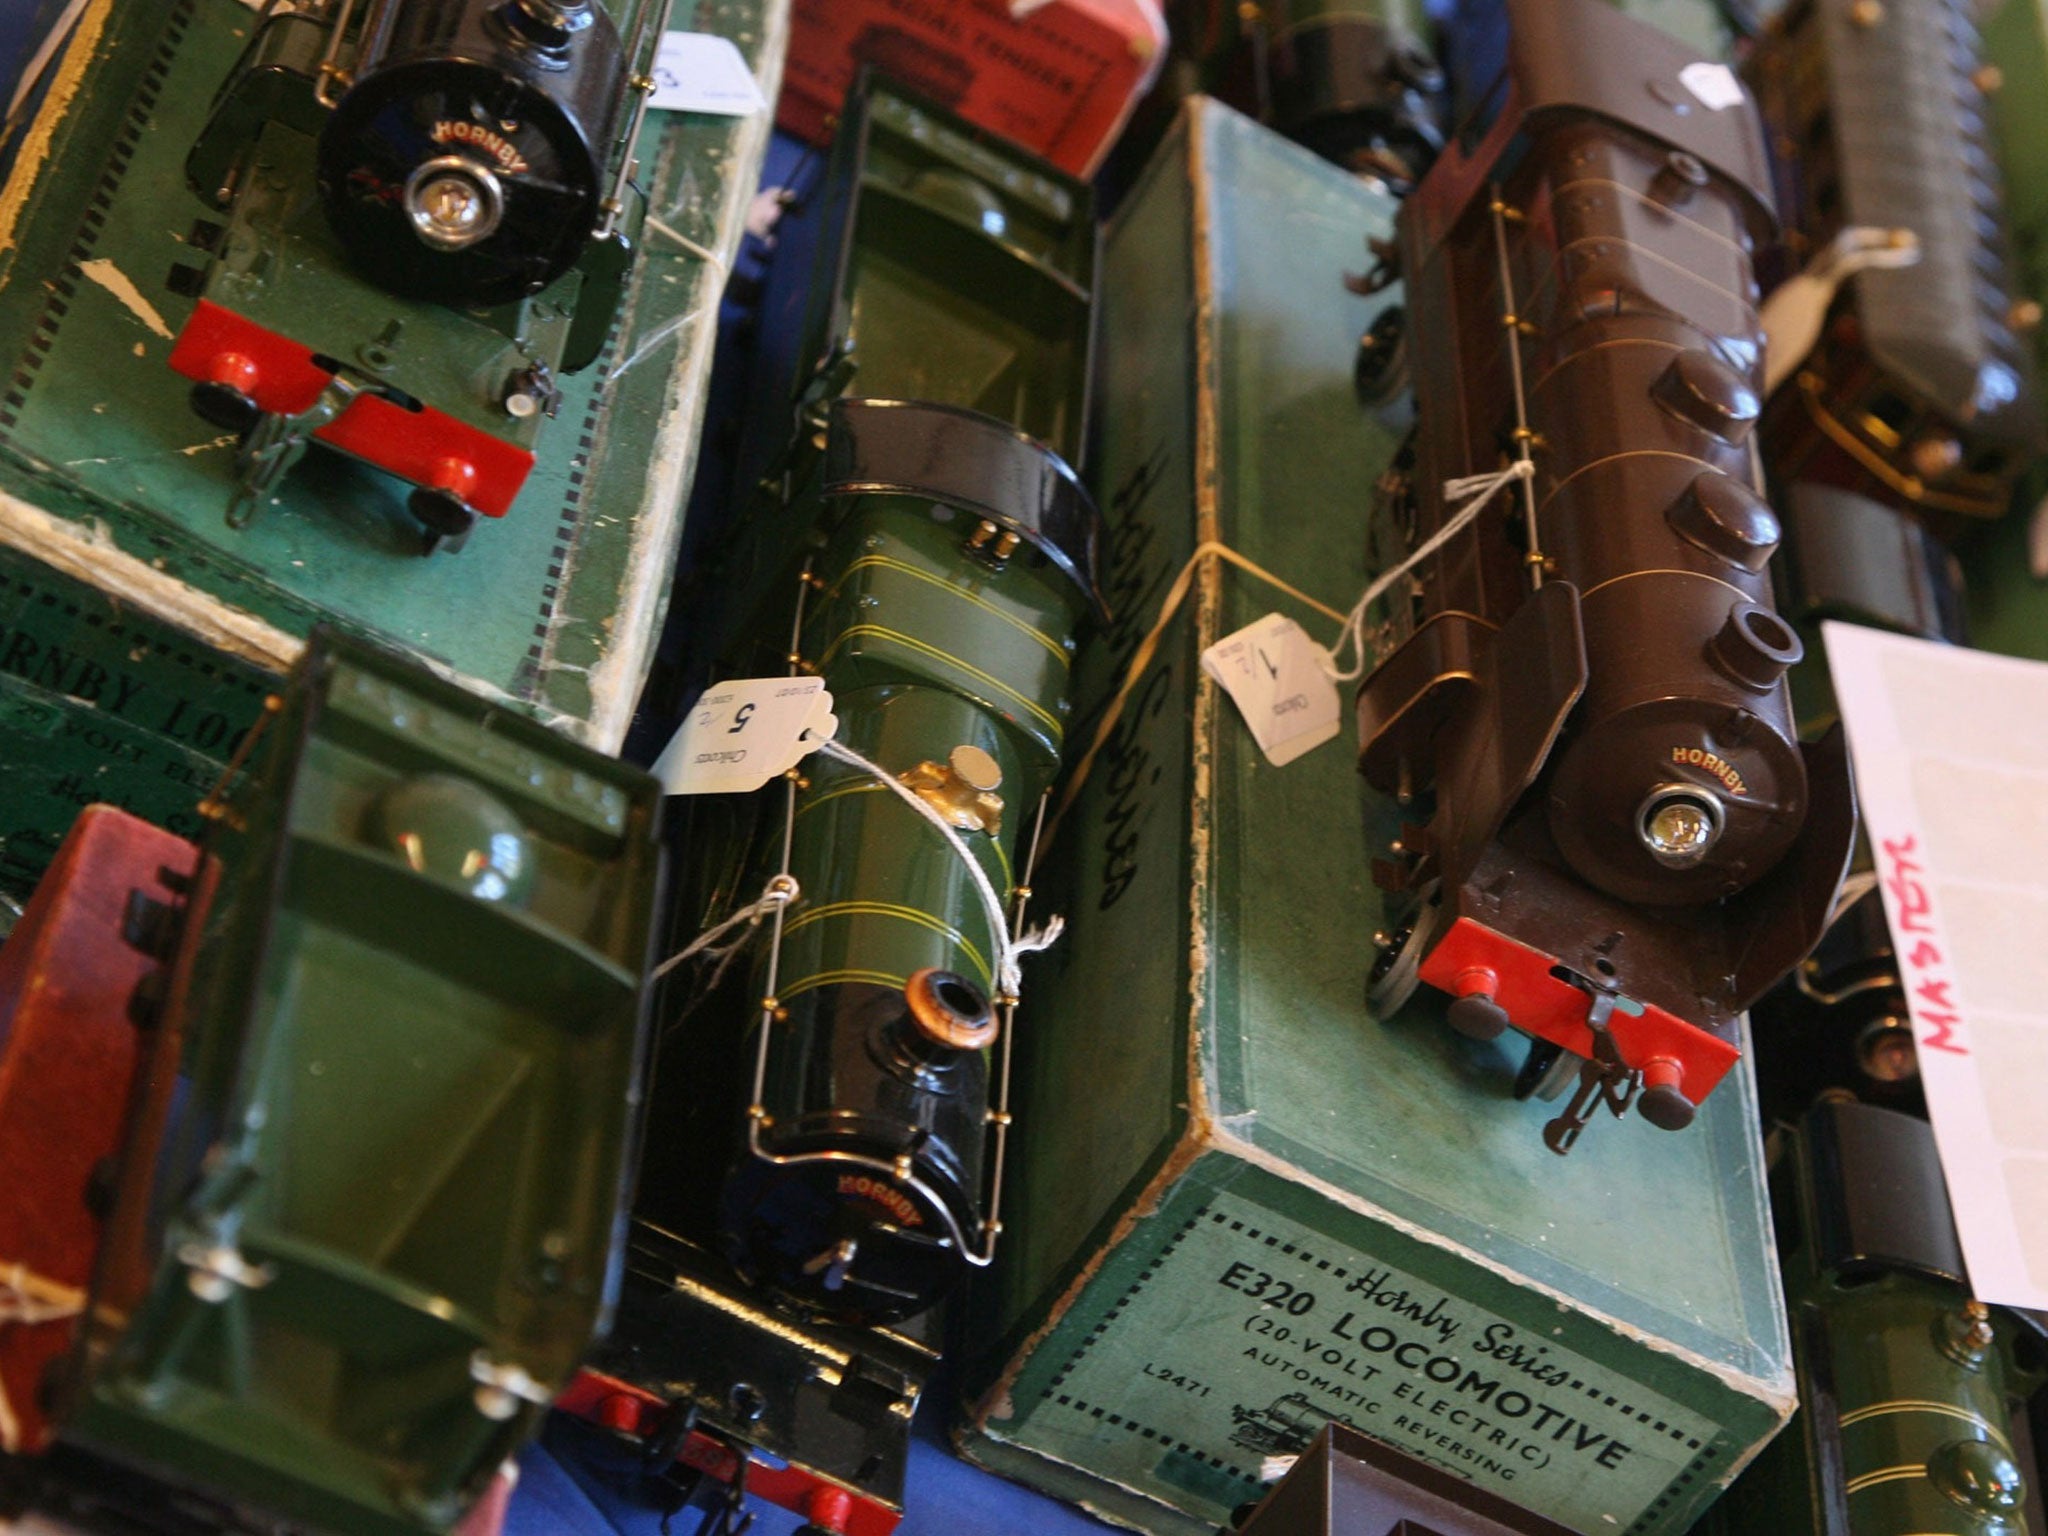 Negotiations are now taking place between Hornby and its lenders, after the company issued a fourth profit warning in three years